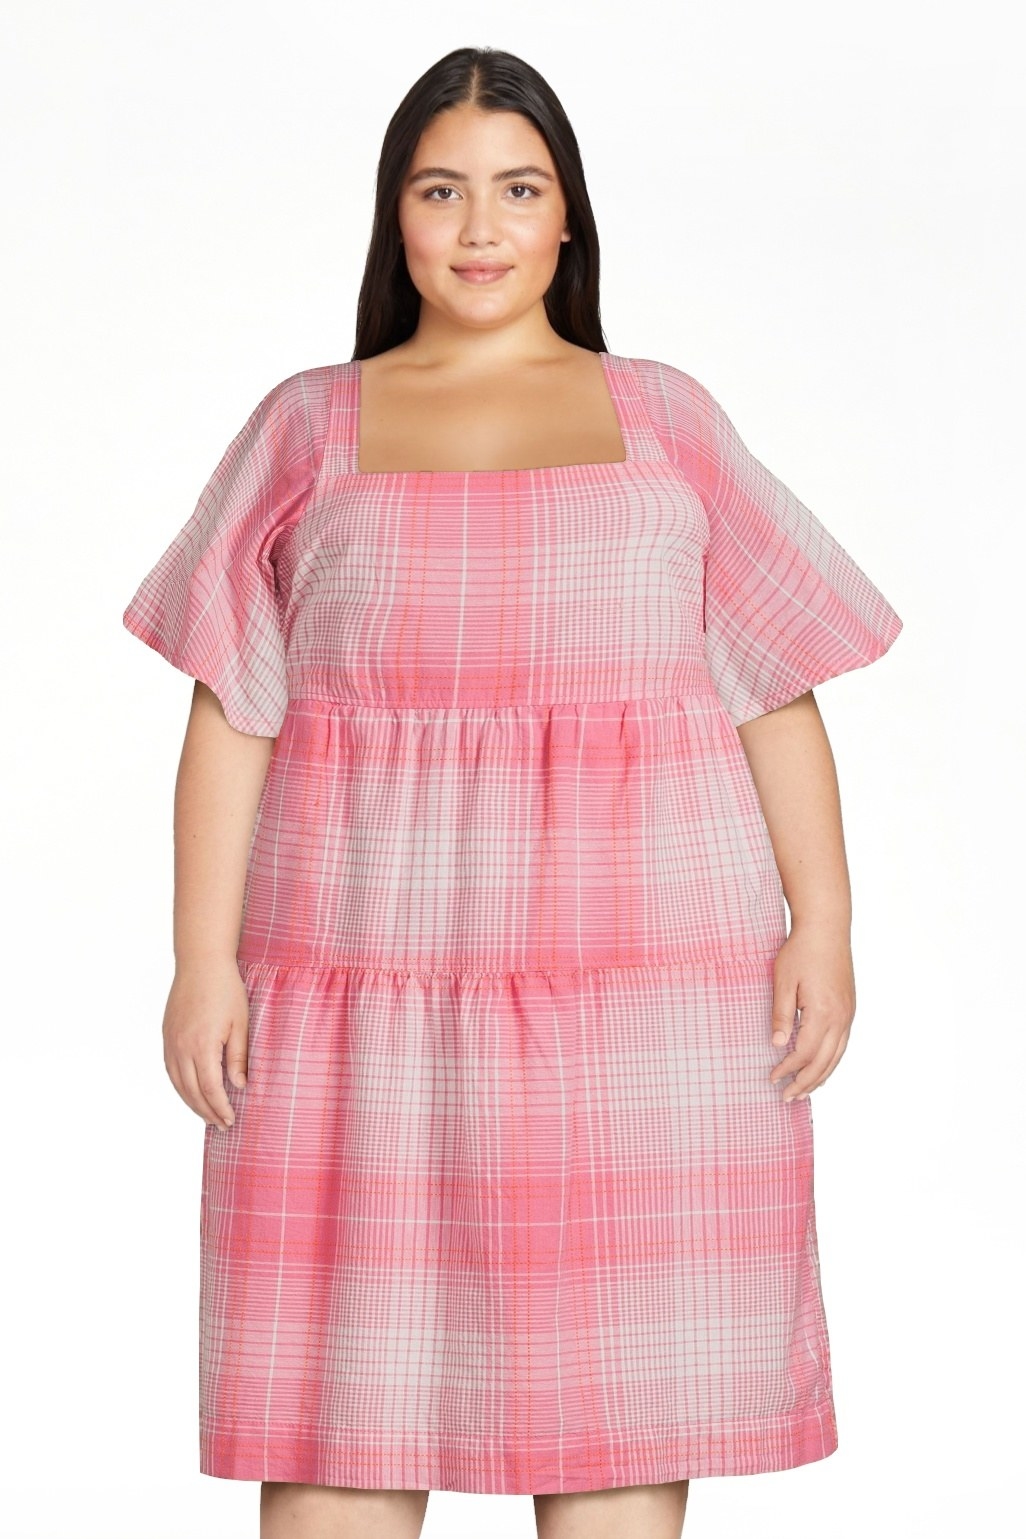 Model wearing the pink plaid dress